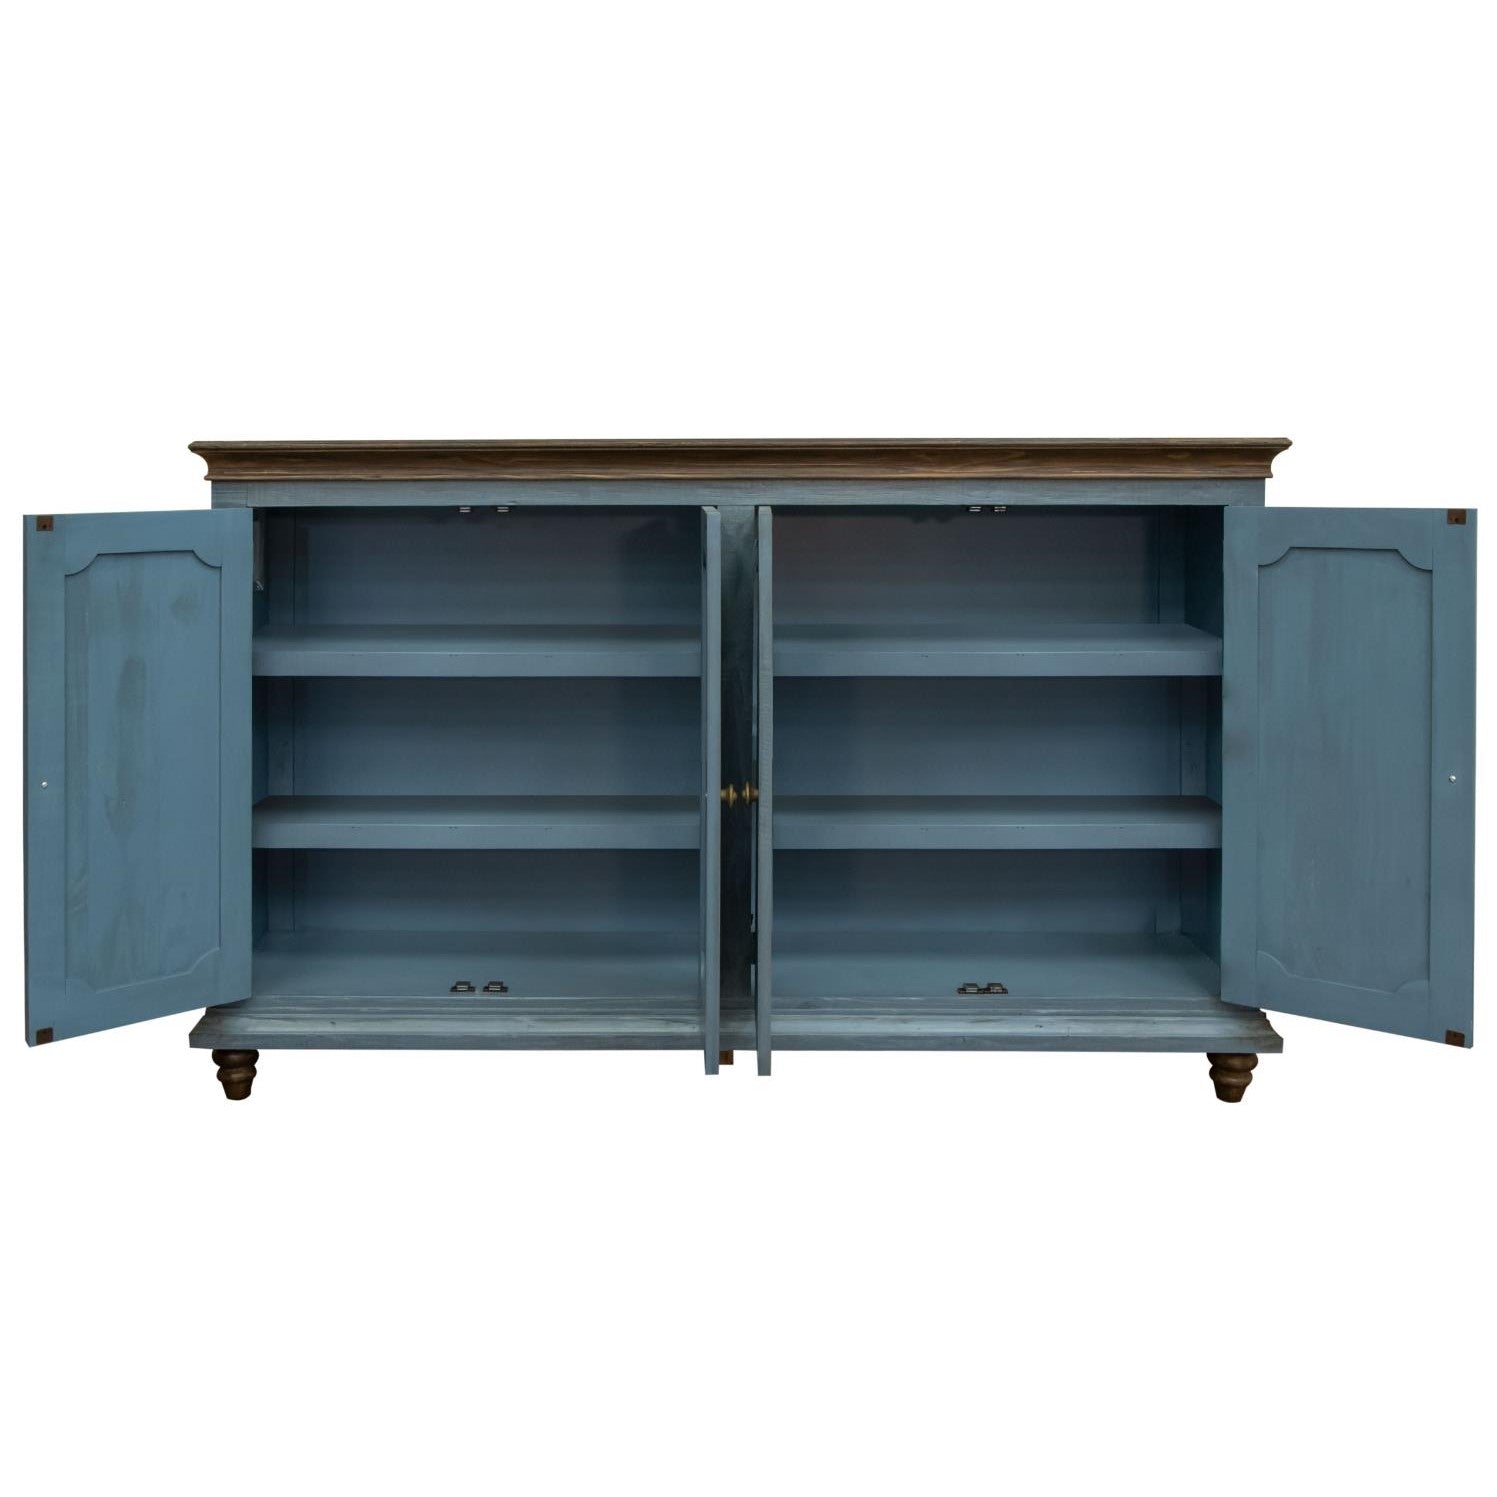 Picture of Mirage 71" Blue Sideboard